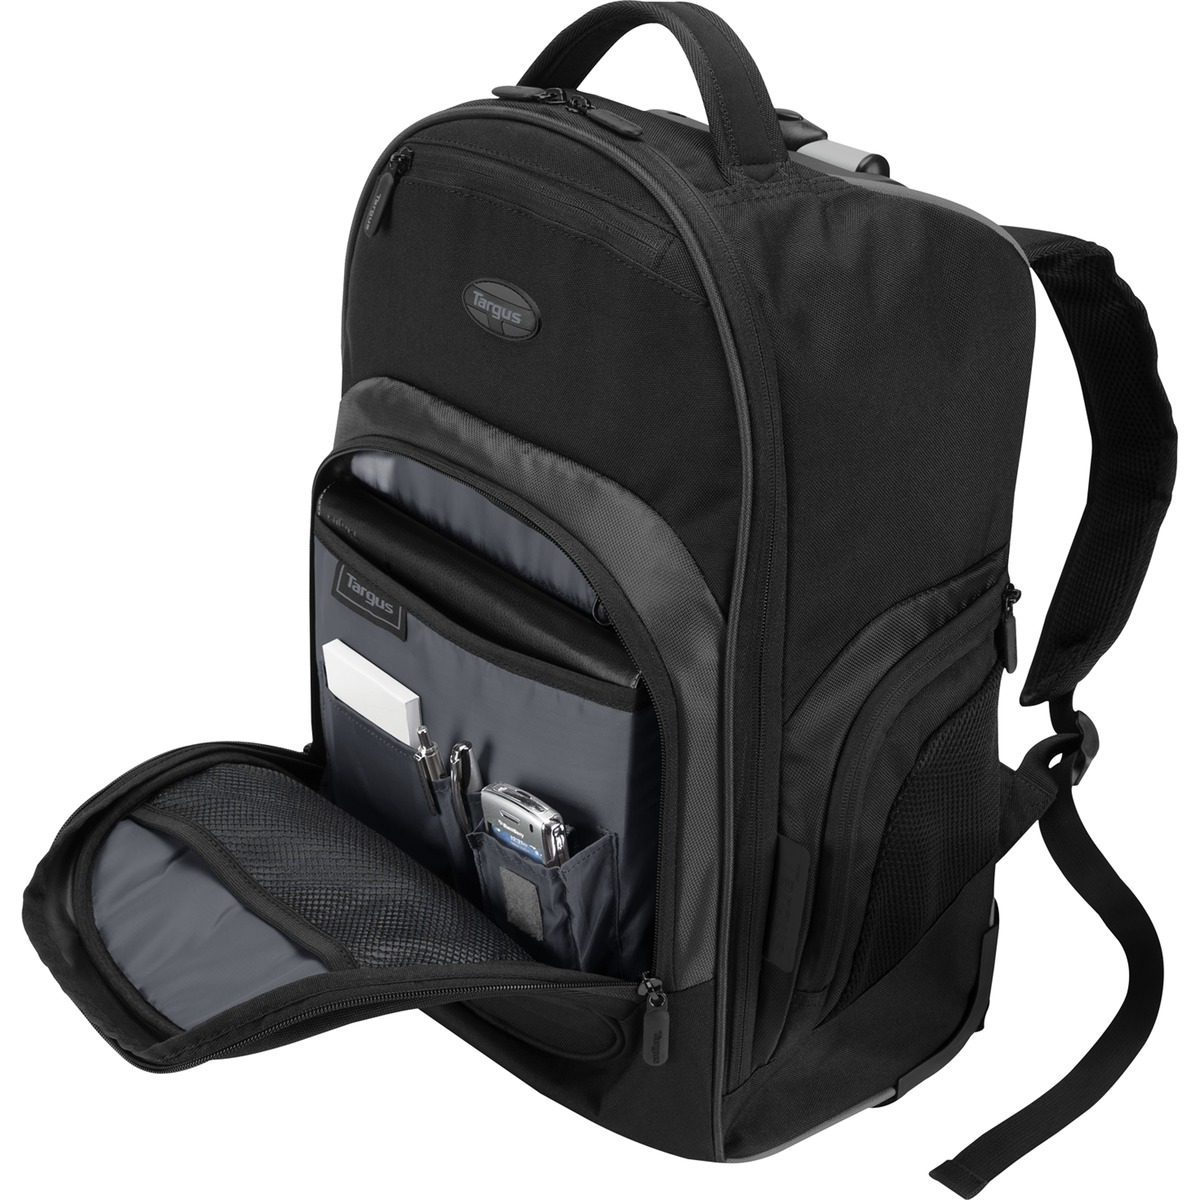 Targus 16" Compact Rolling Laptop Backpack, Black - image 5 of 10